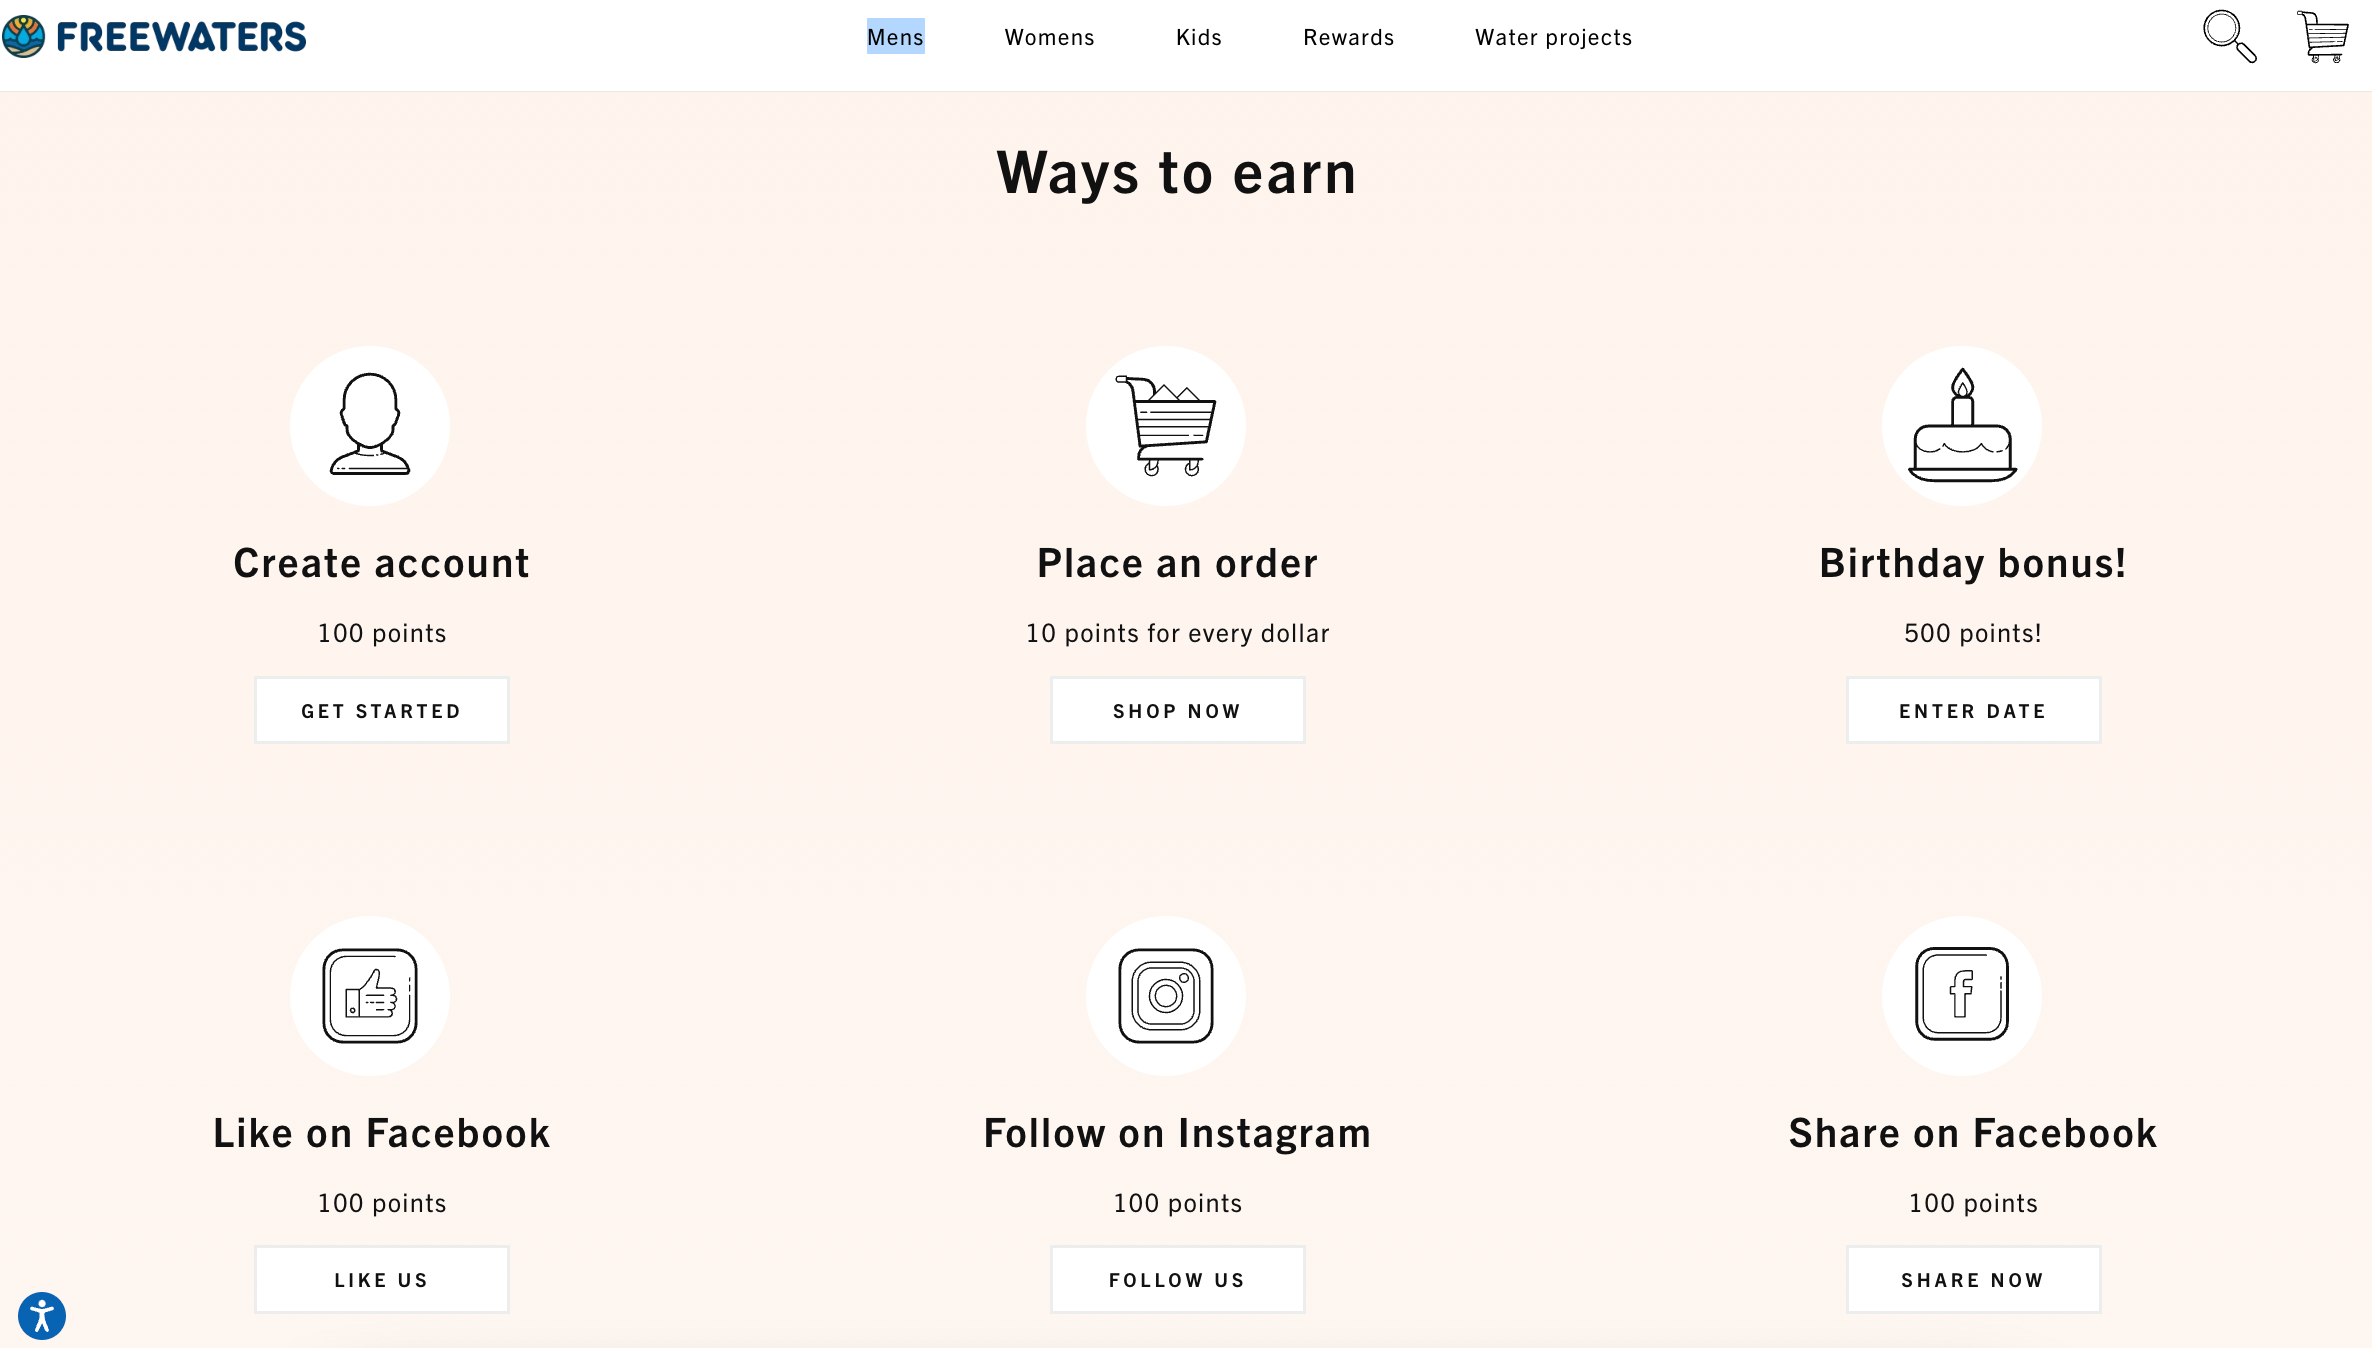 screenshot of freewater's loyalty and rewards program with its "ways to earn"